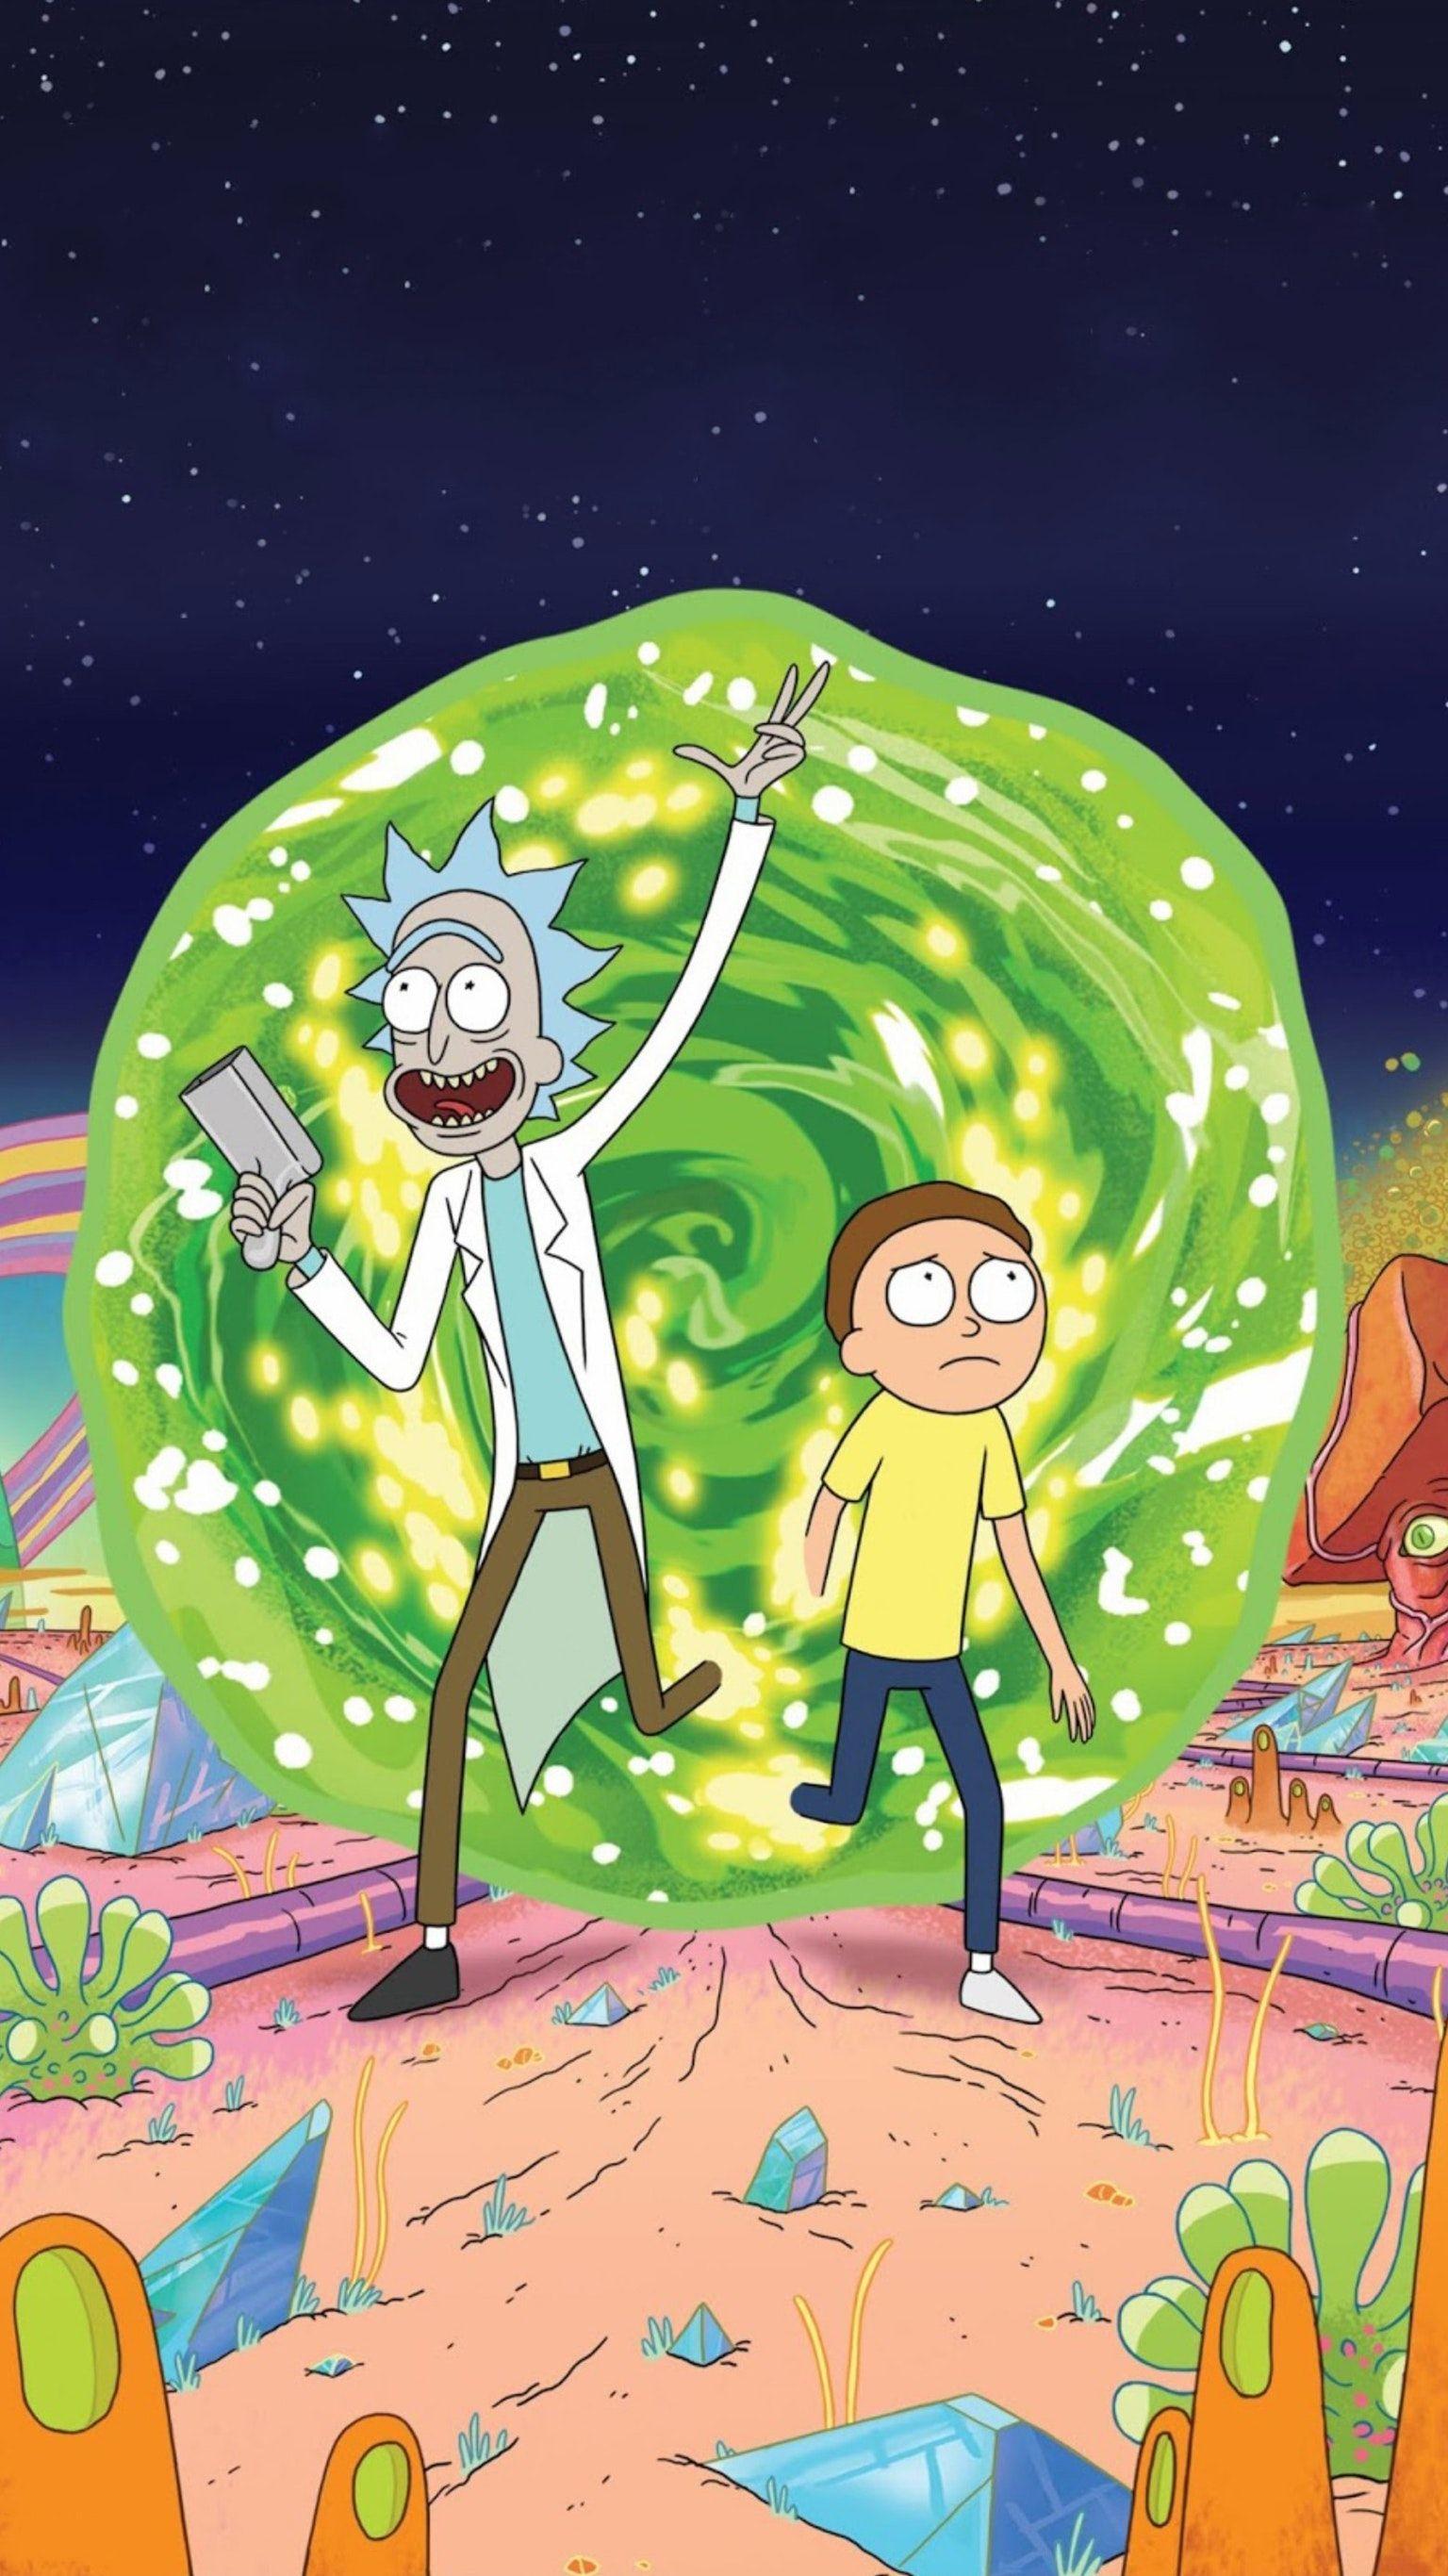 Rick and Morty 4k Ultra HD Papel De Parede by Jonas Balkevičius  Rick and  morty Rick and morty image Rick and morty season